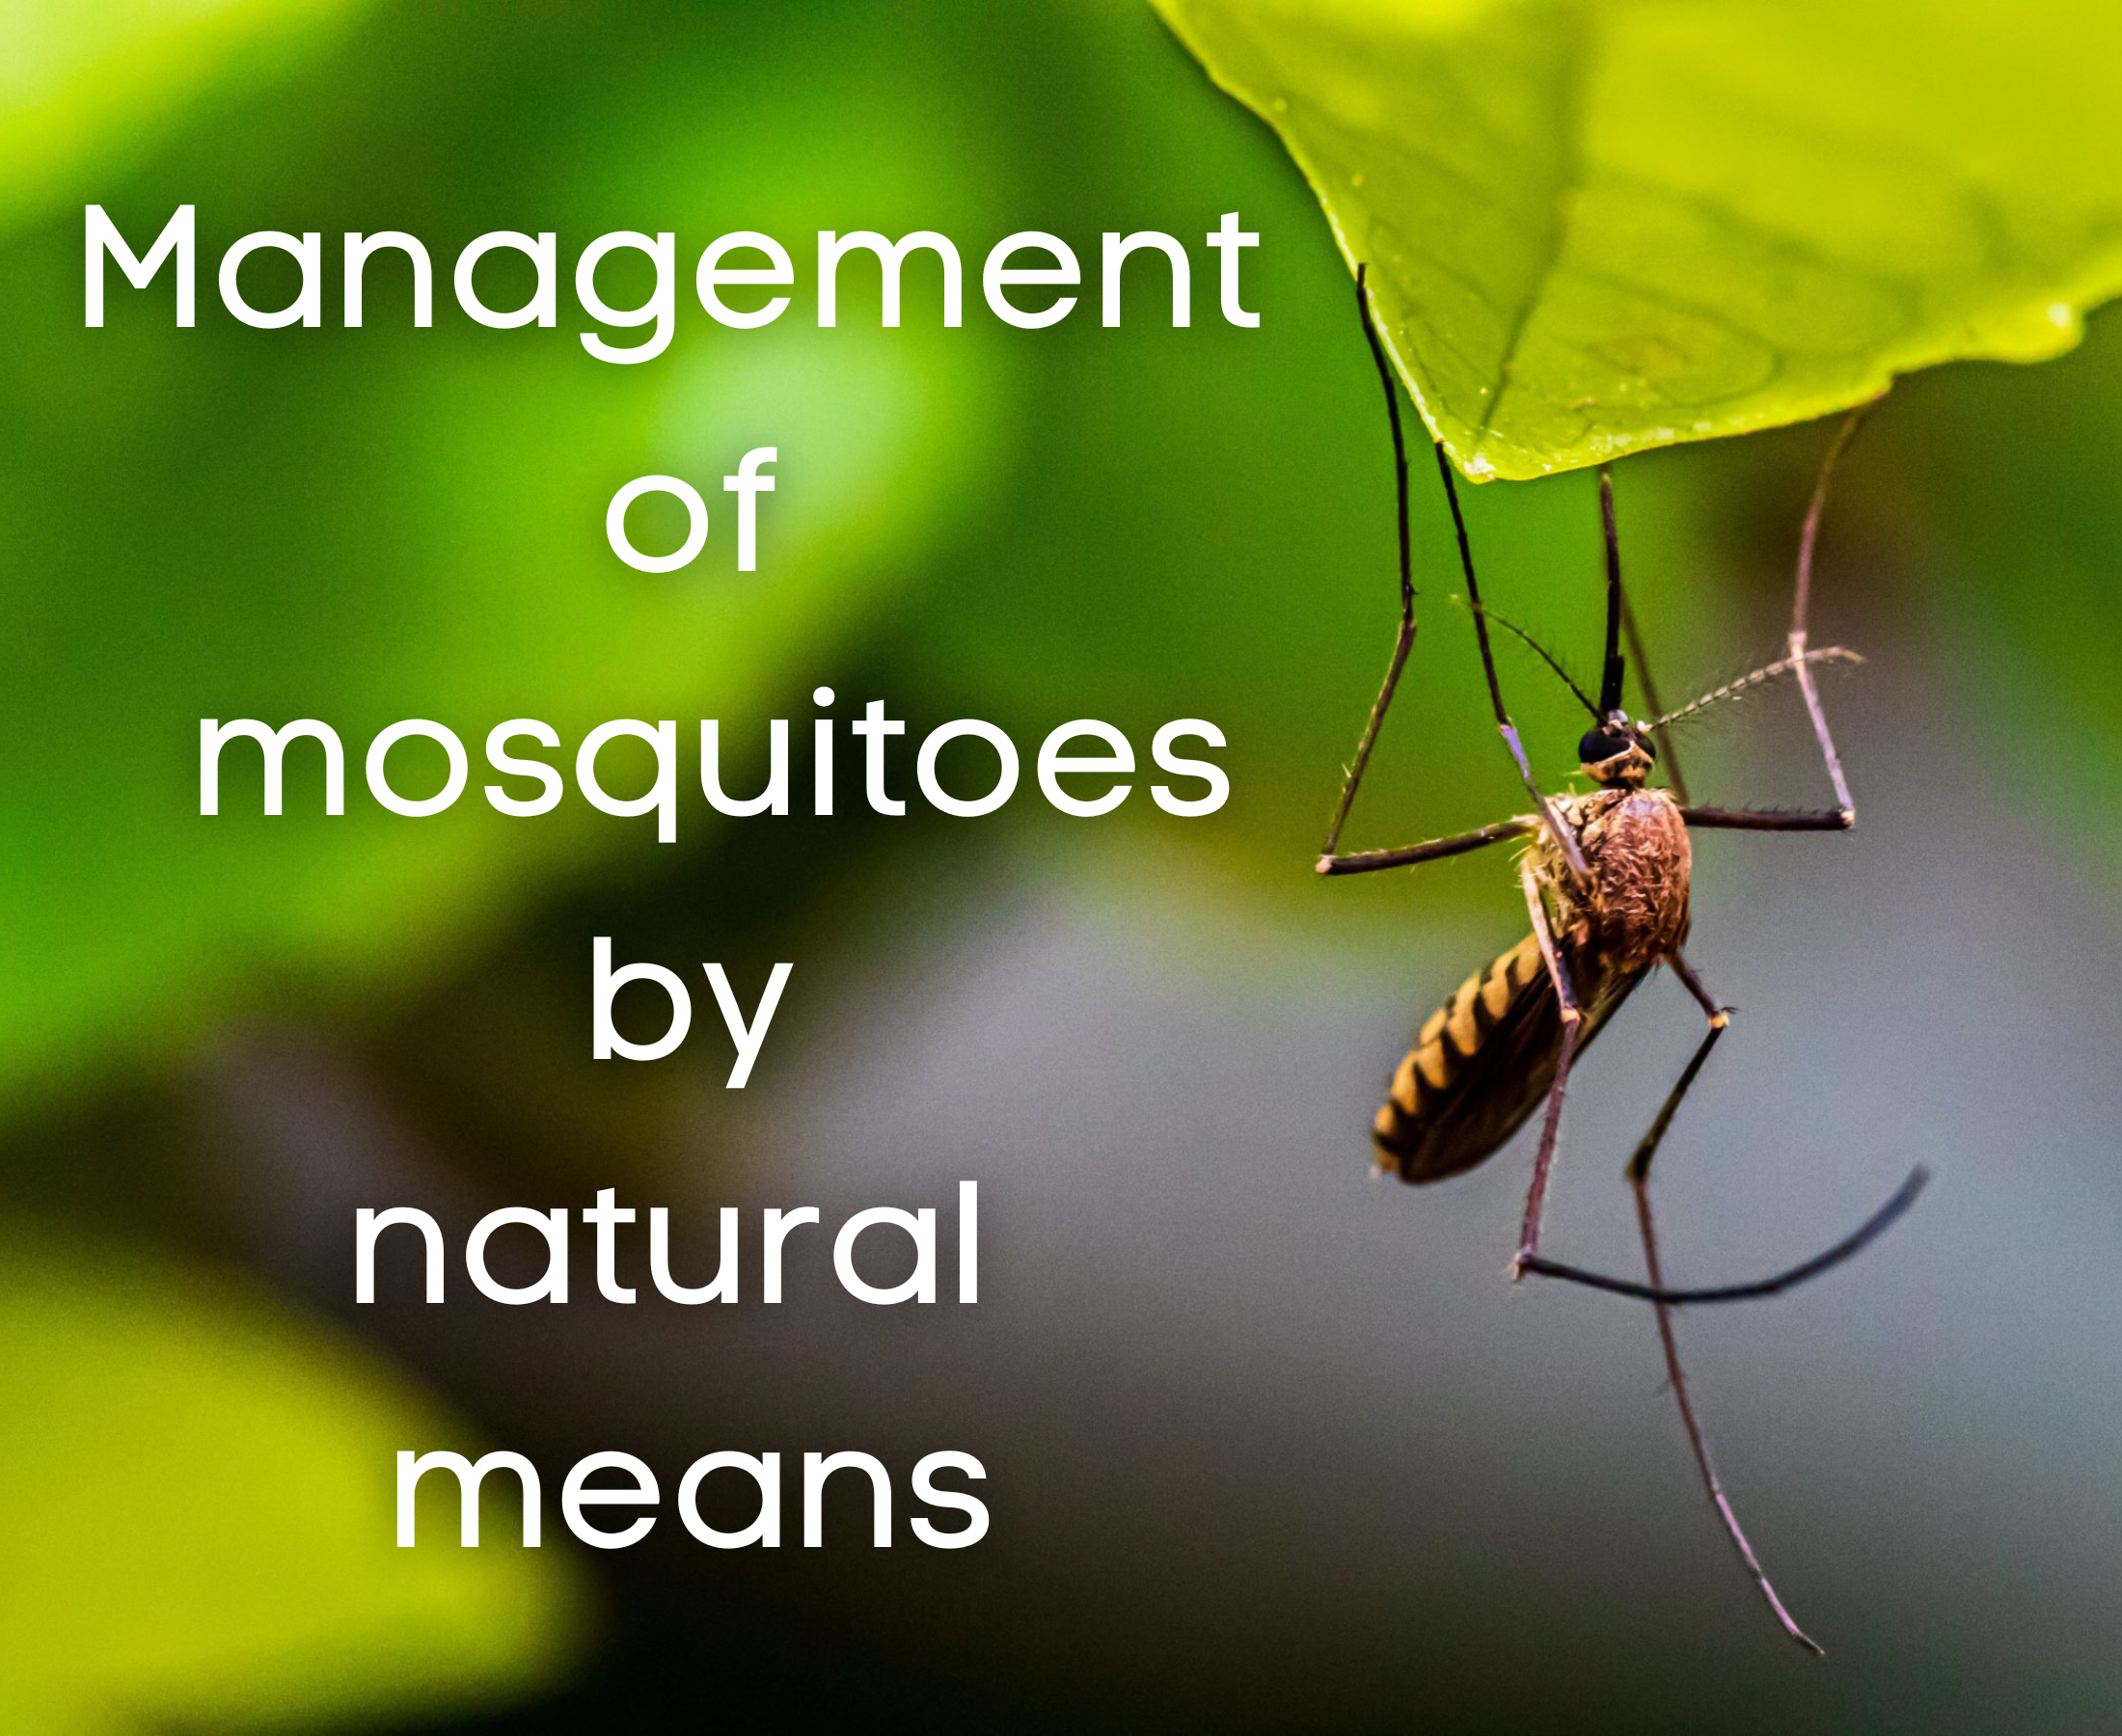 What are 3 common methods to control mosquitoes?